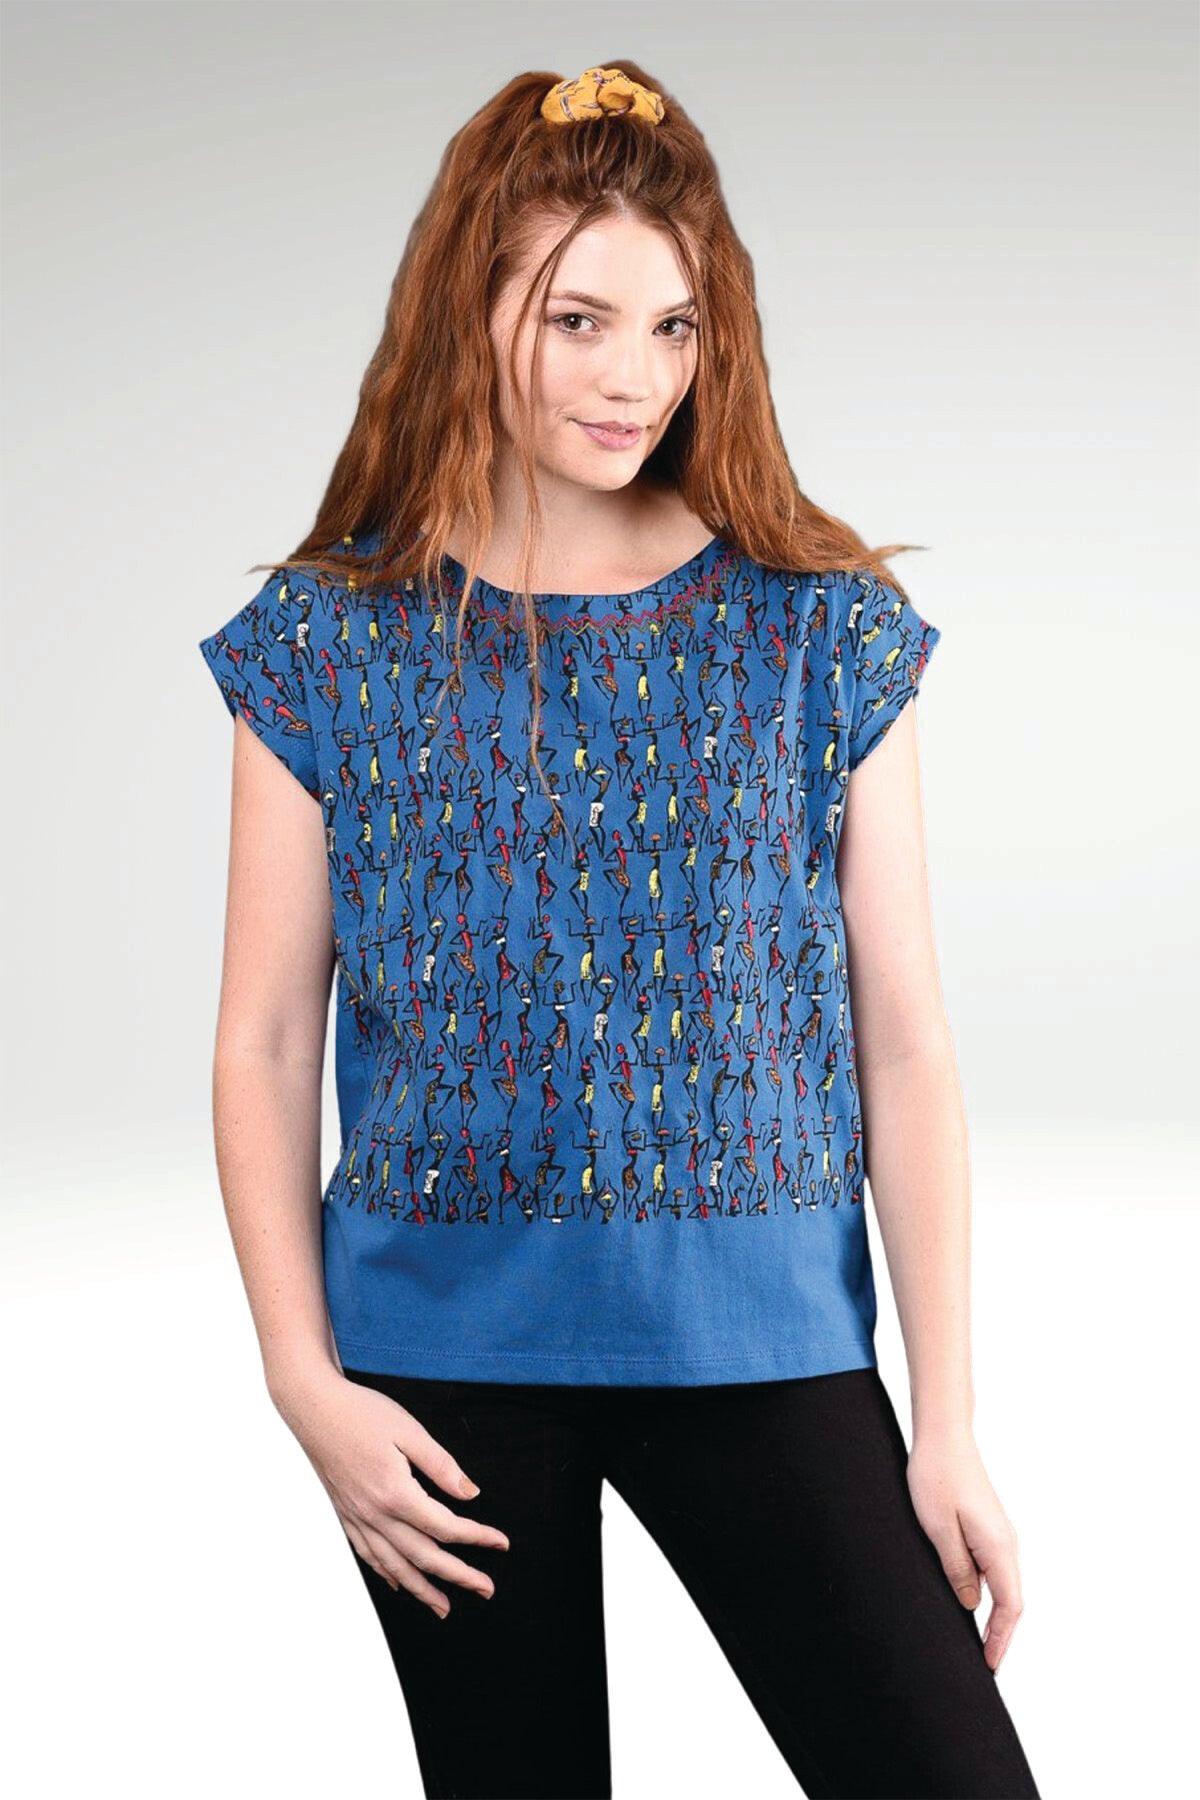 FARICA EMBROIDERED KNIT TEE - zohaonline